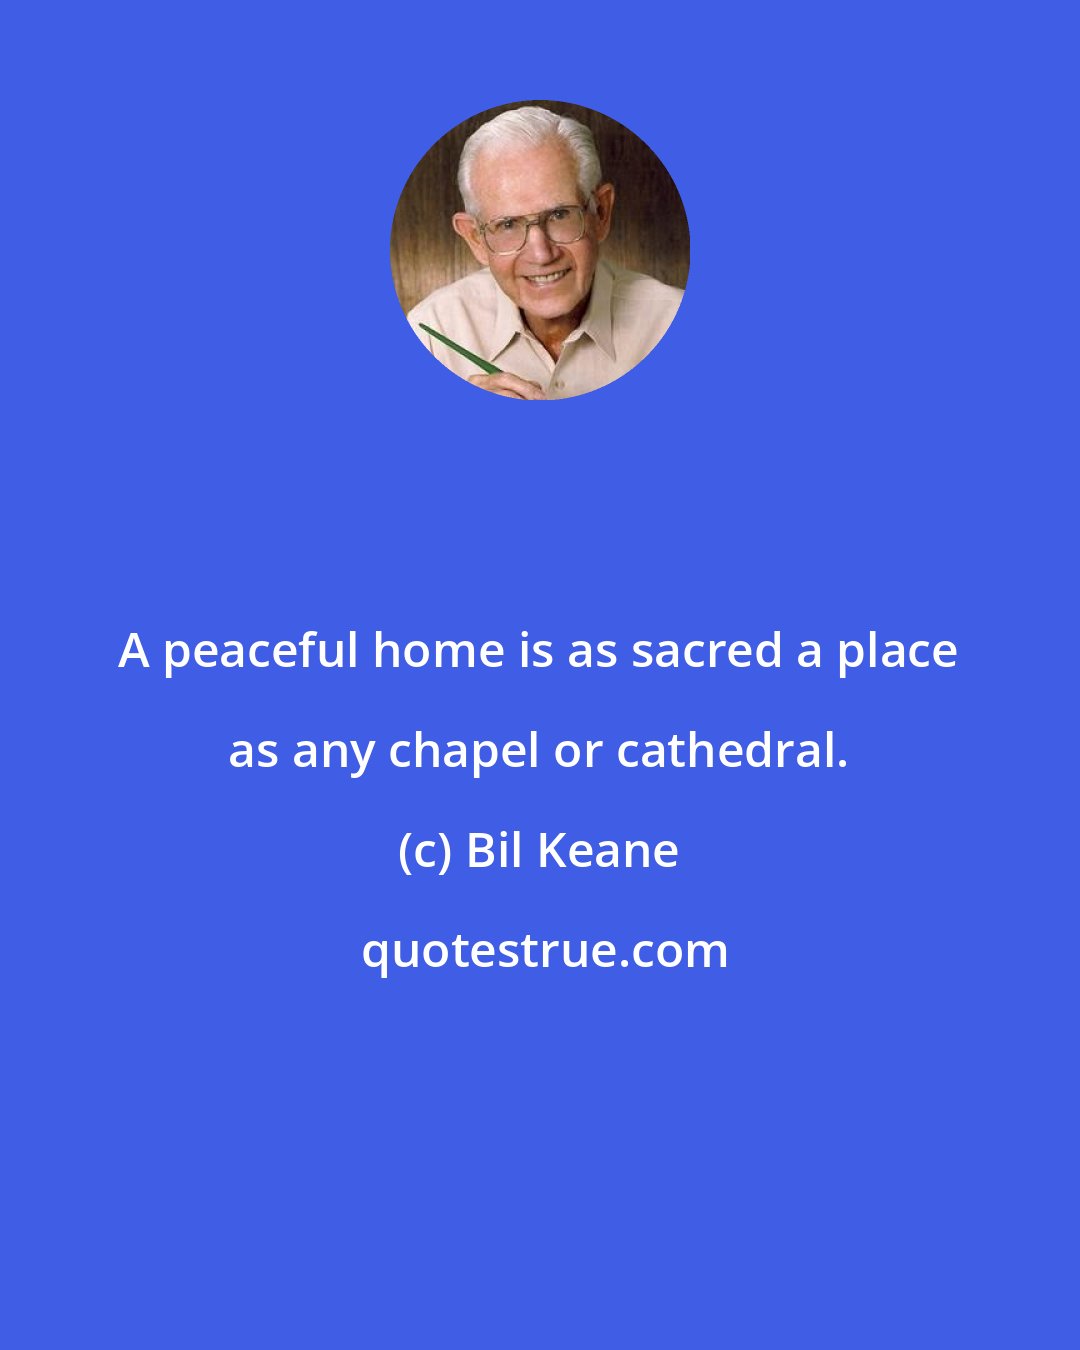 Bil Keane: A peaceful home is as sacred a place as any chapel or cathedral.